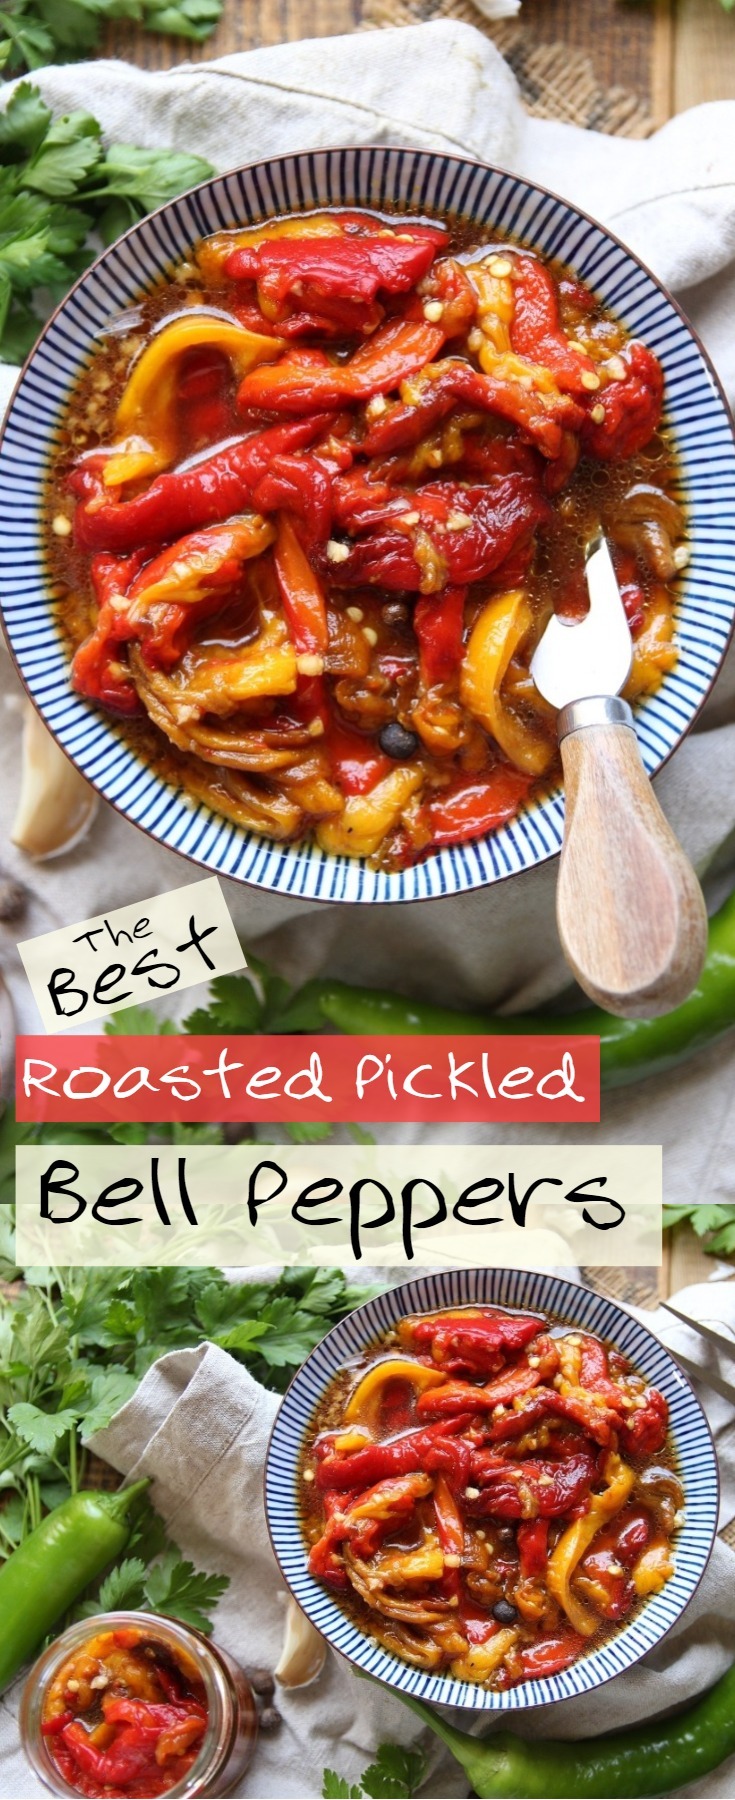 Roasted Pickled Peppers